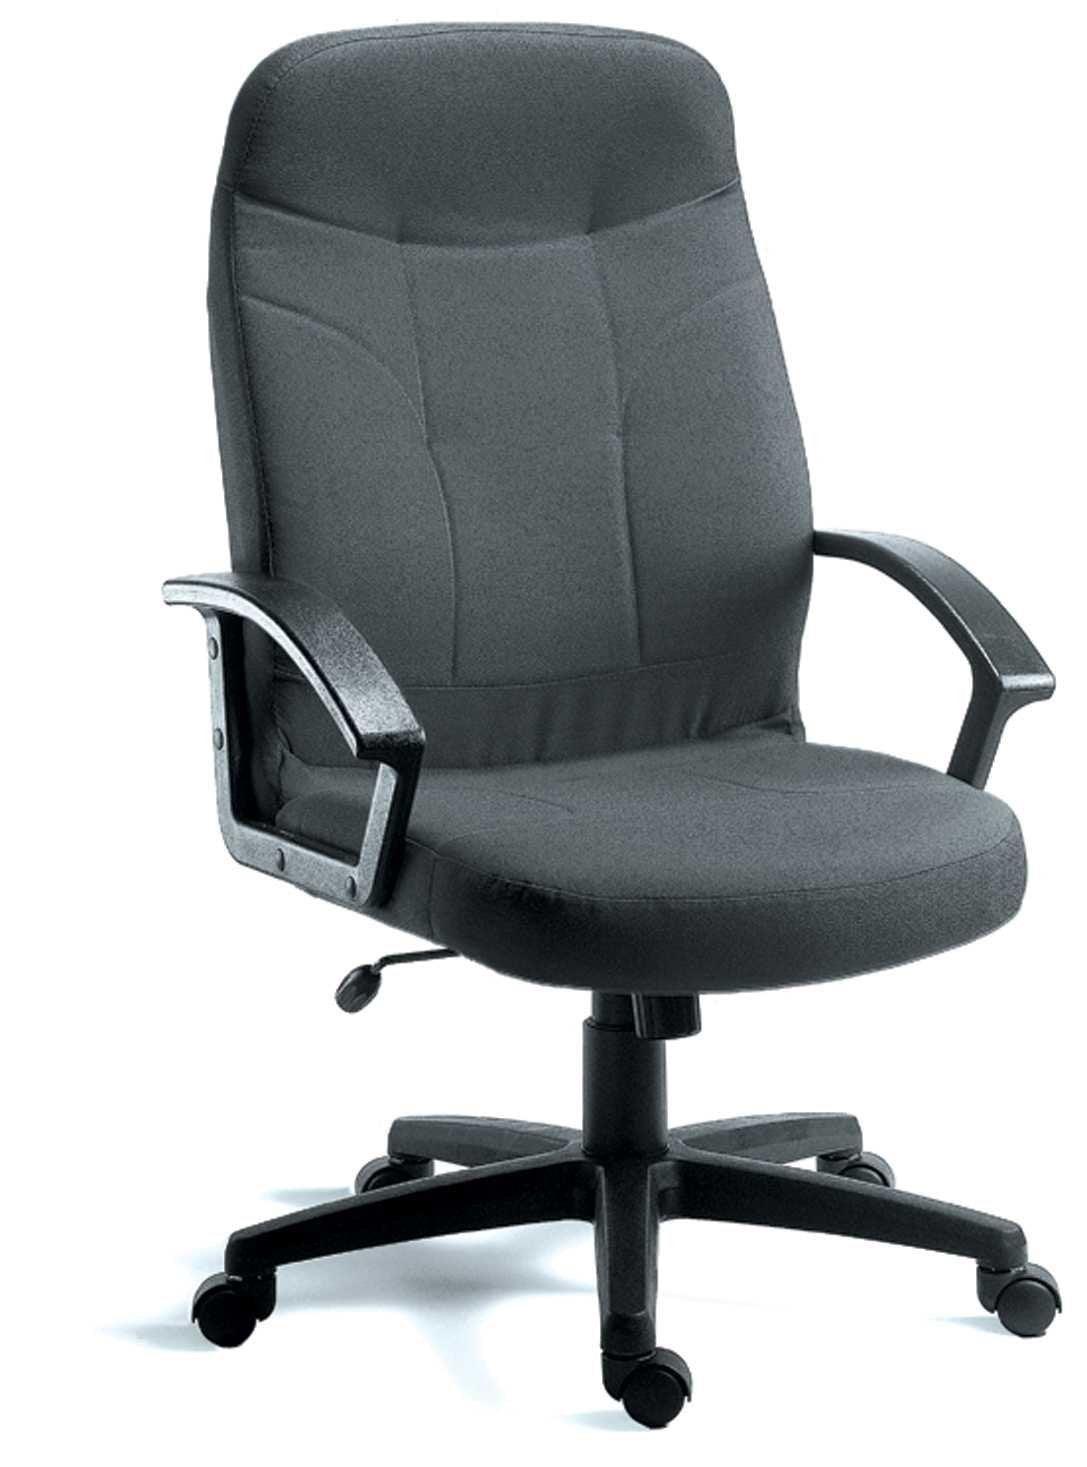 Mayfair fabric office chair (charcoal) - crimblefest furniture - image 1